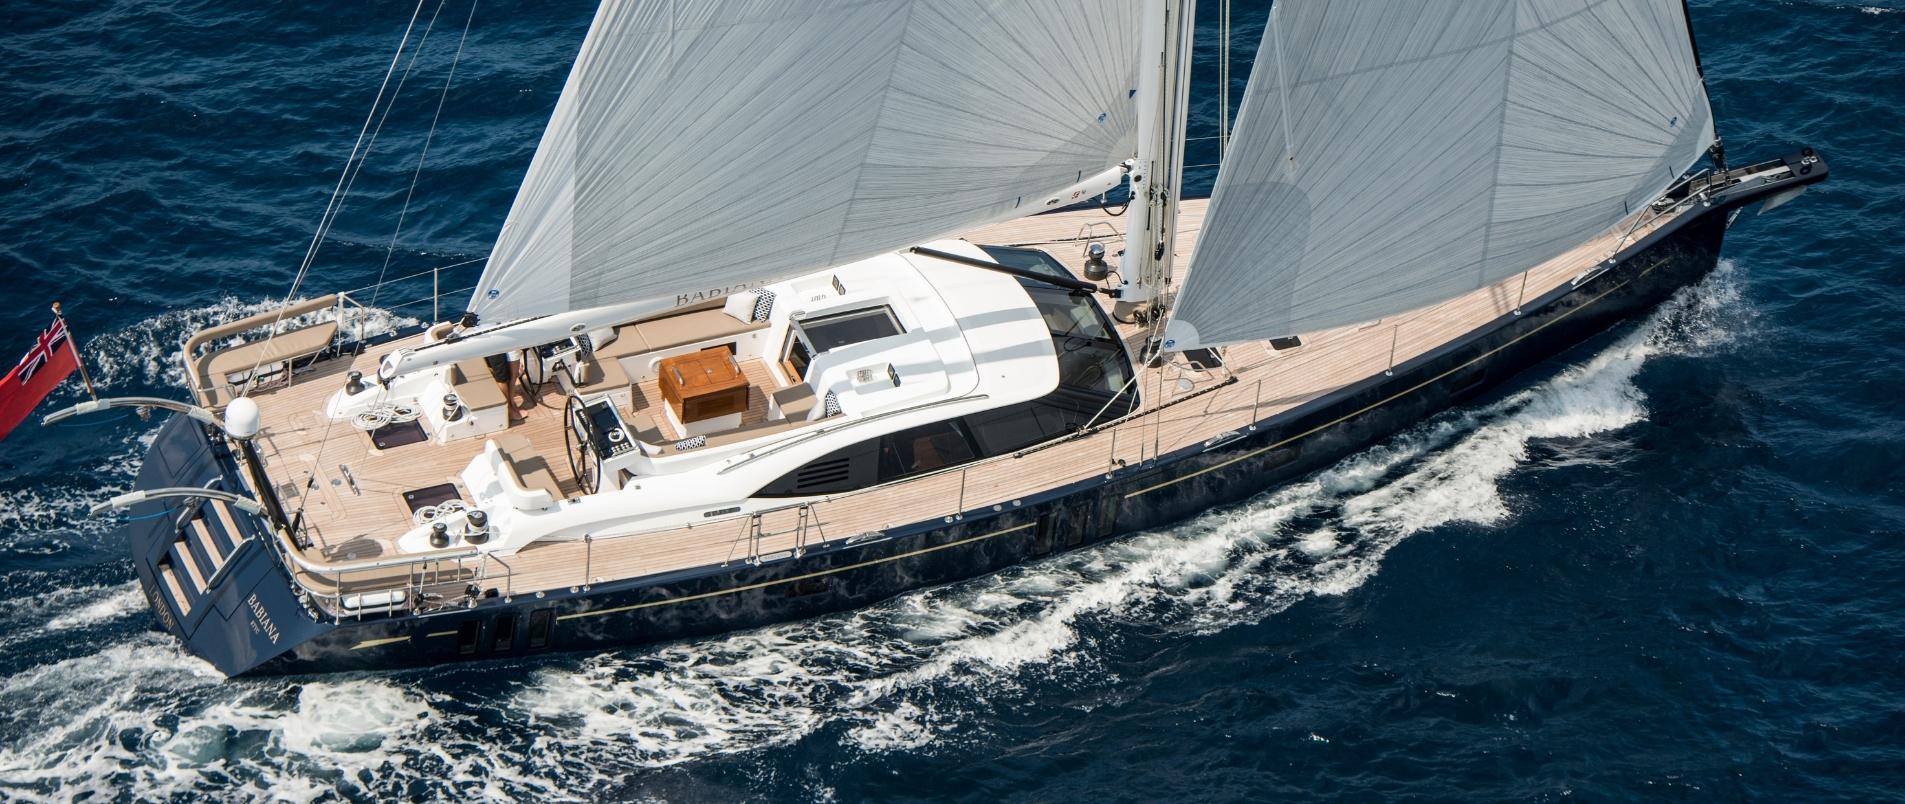 Oyster 675 70 Foot Ocean Sailboat For Sale Oyster Yachts